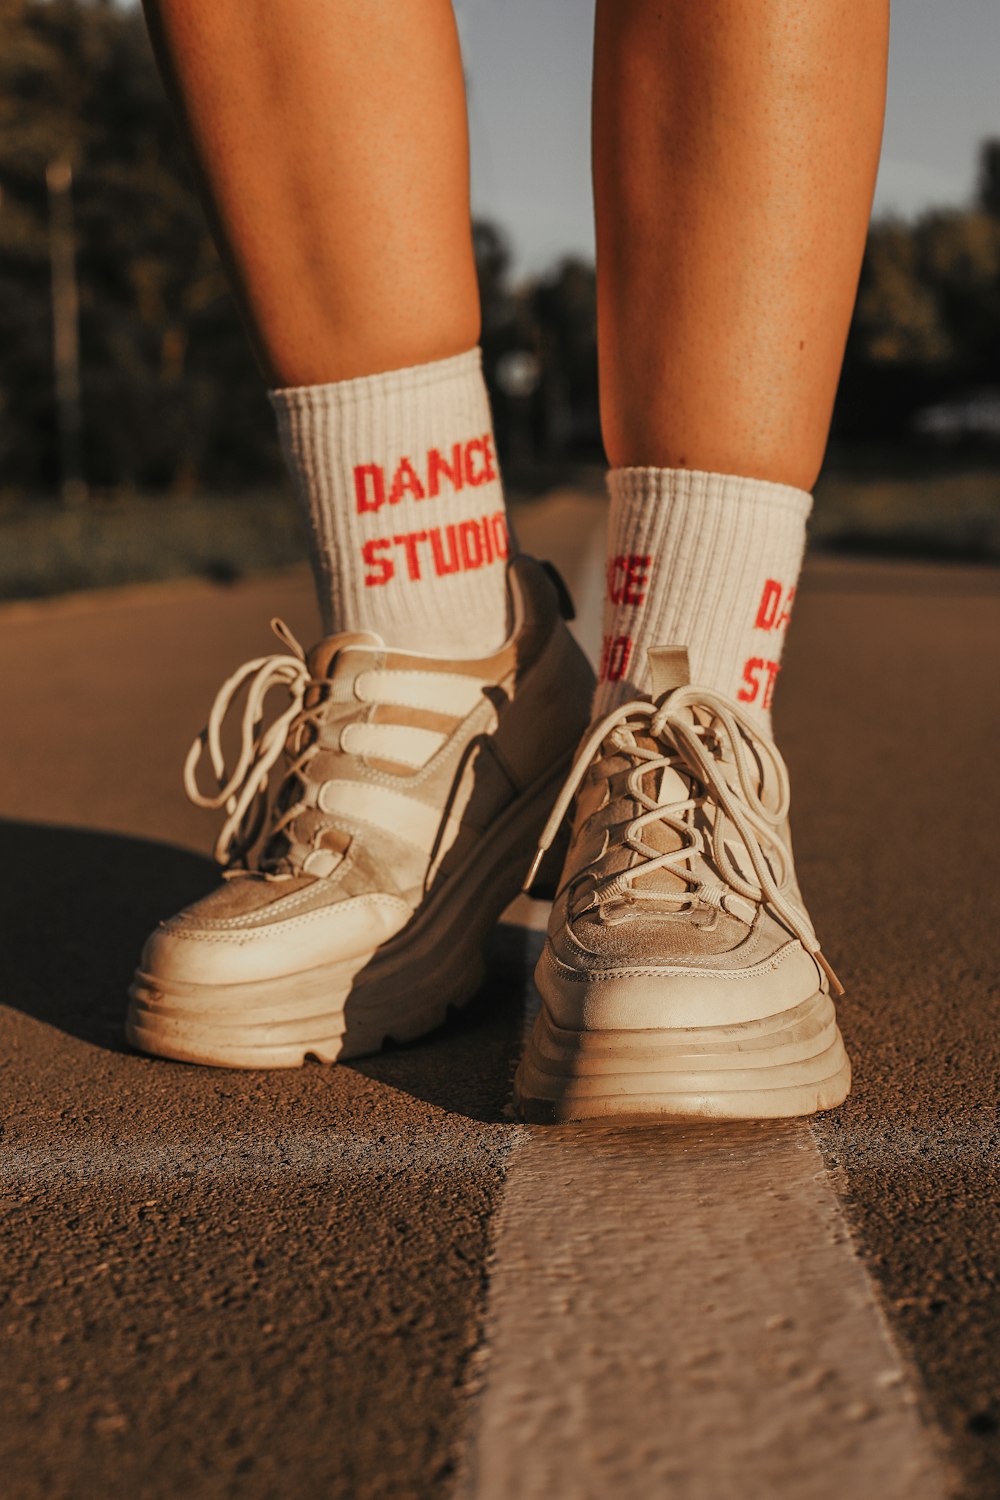 person wearing white and red socks and white adidas sneakers photo – Free  Apparel Image on Unsplash